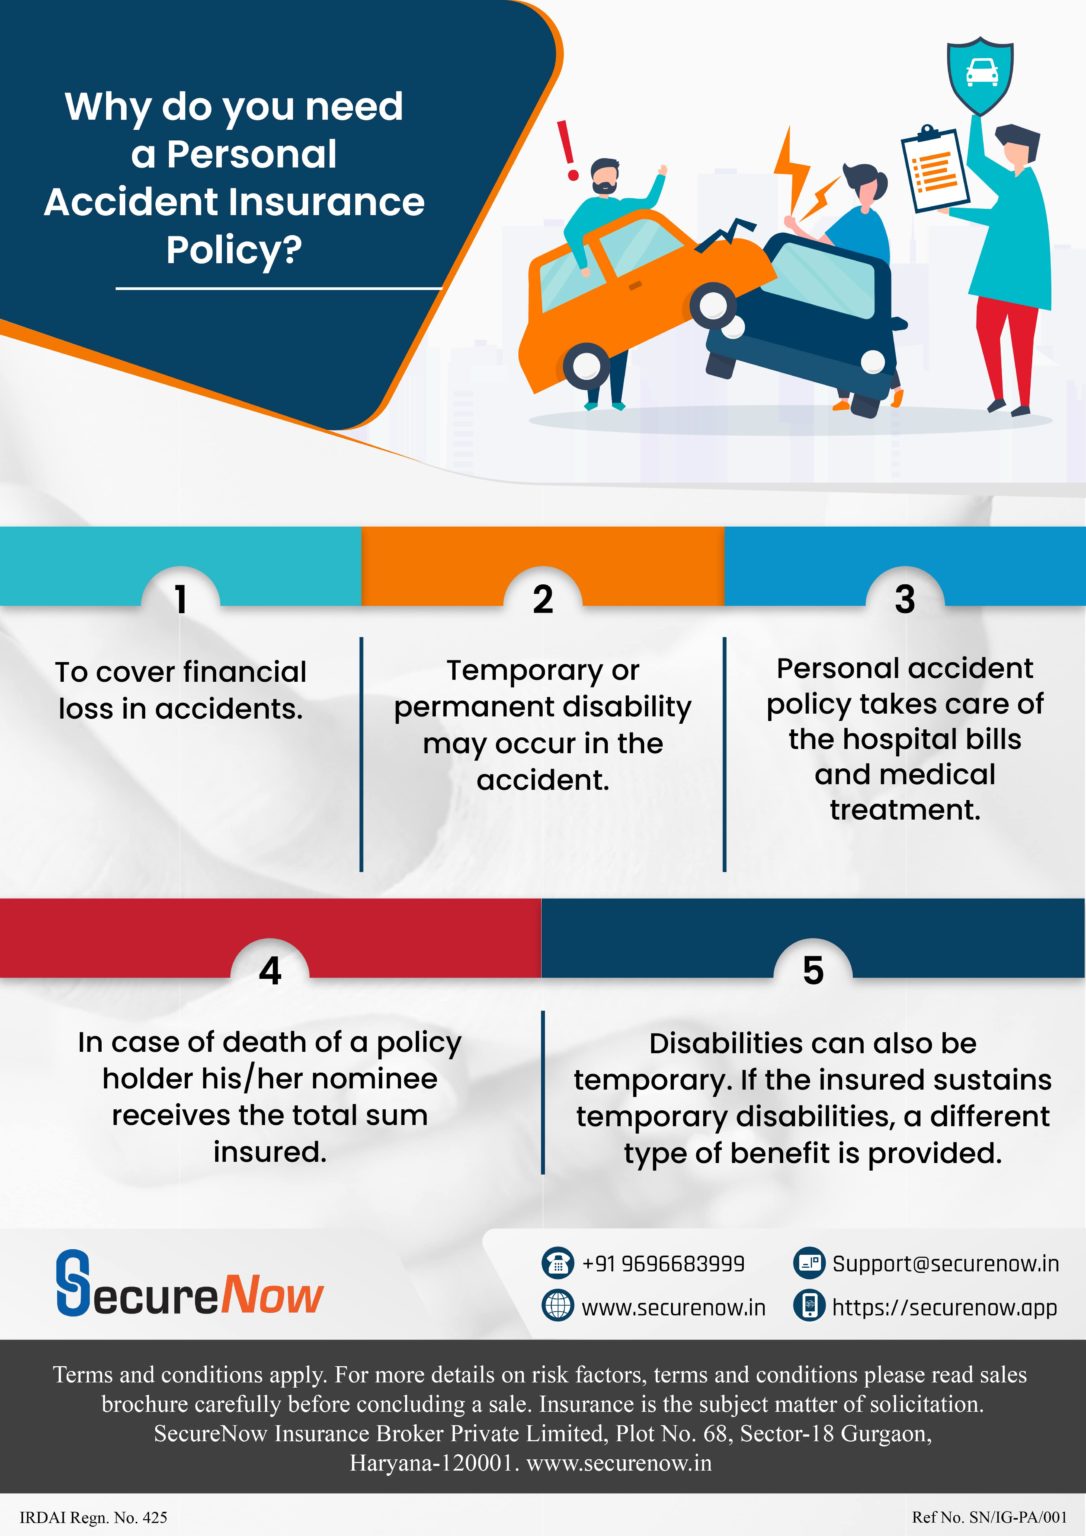 What is covered by personal accident insurance policy?